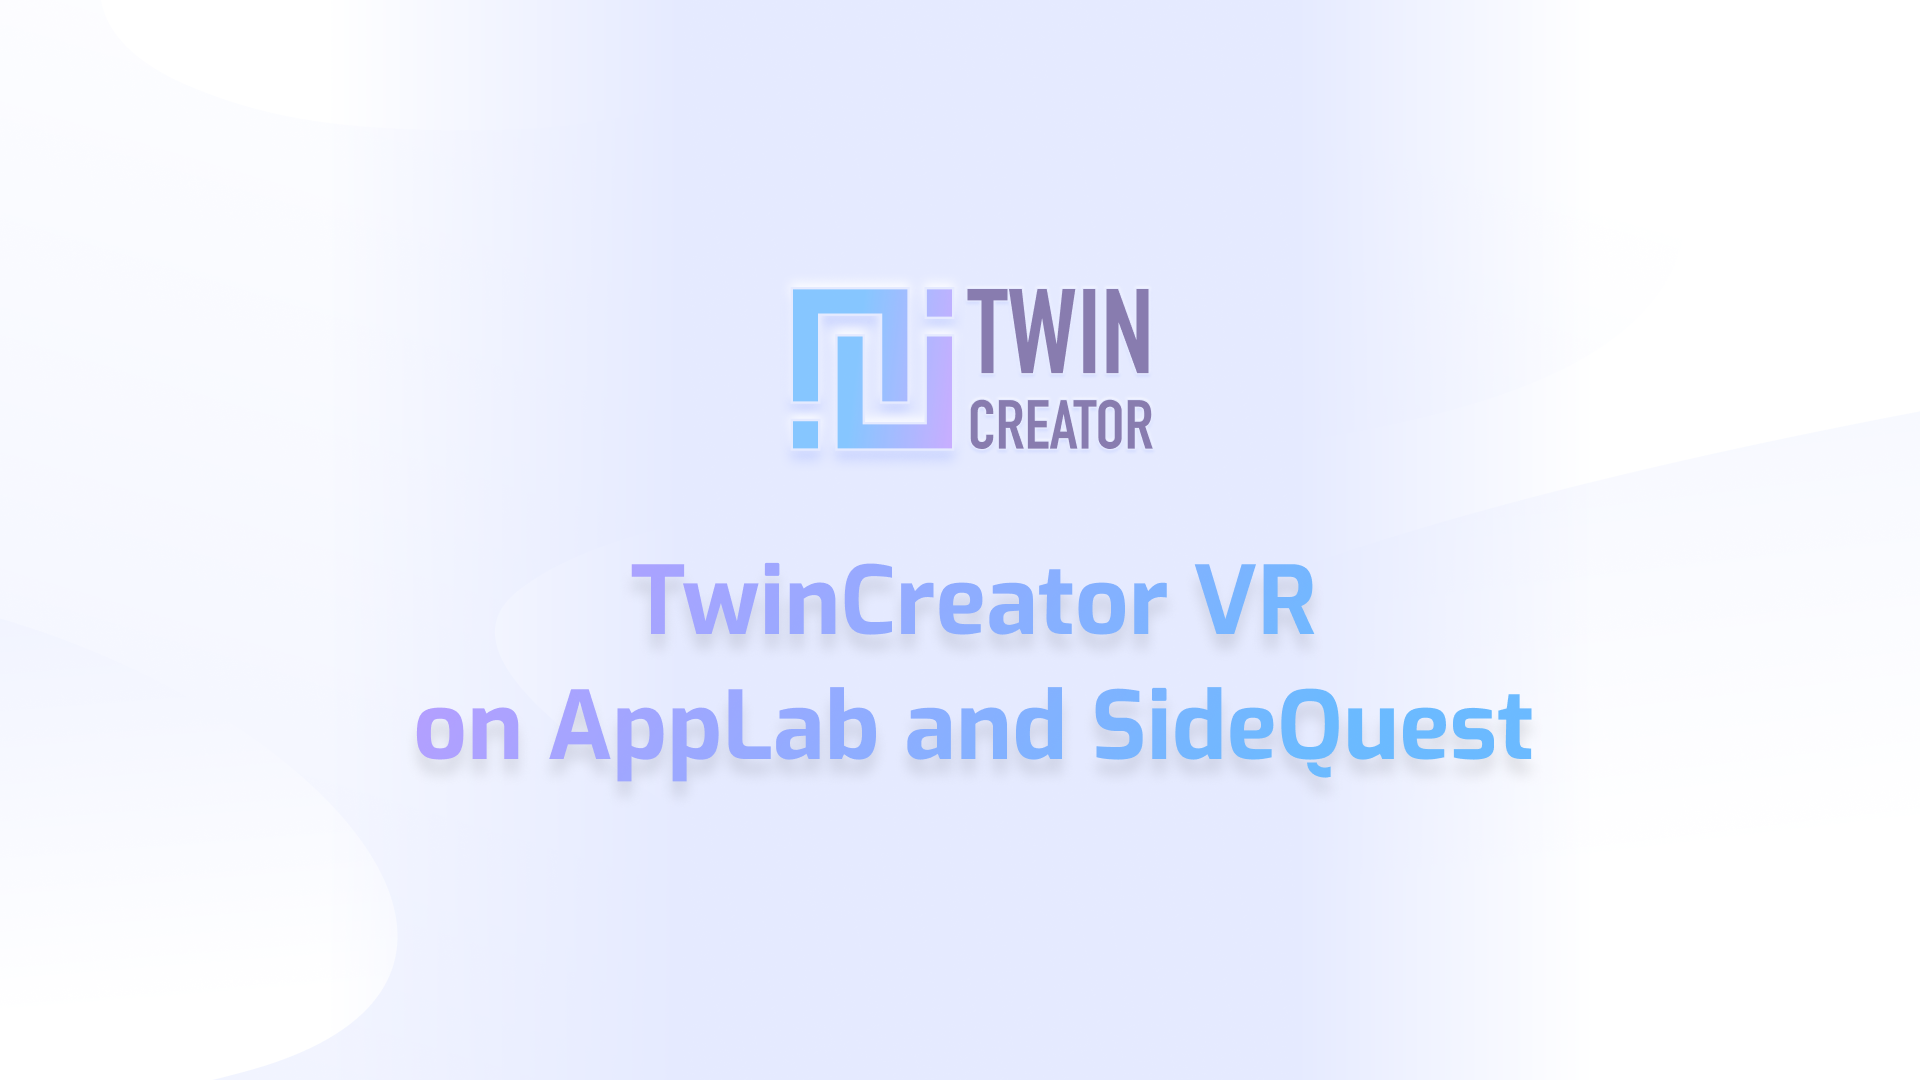 TwinCreator VR is now available on AppLab and SideQuest